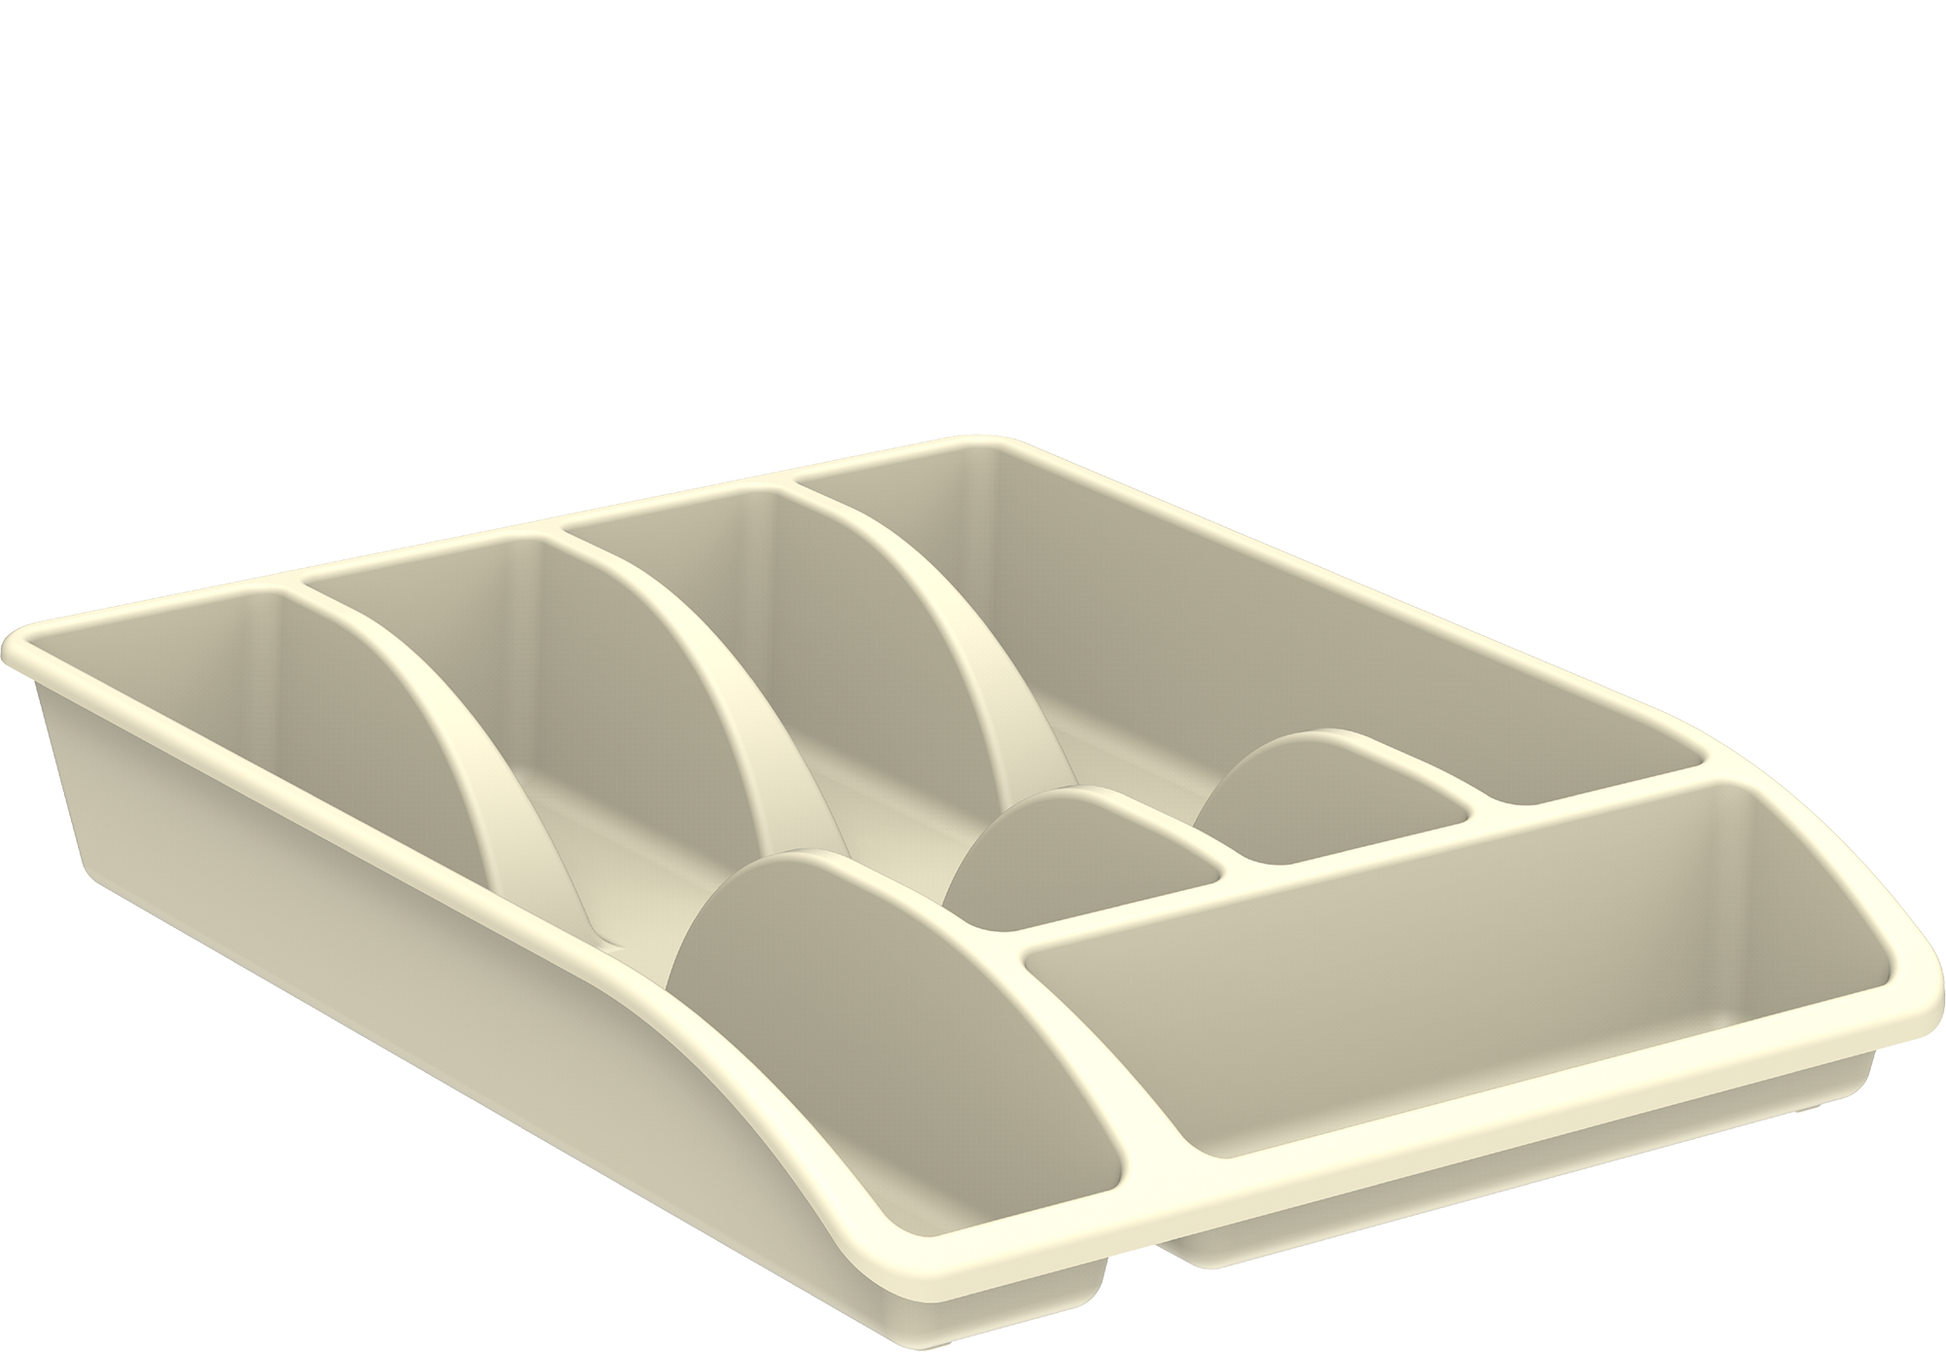 5 Compartment Cutlery Tray - Cosmoplast Bahrain